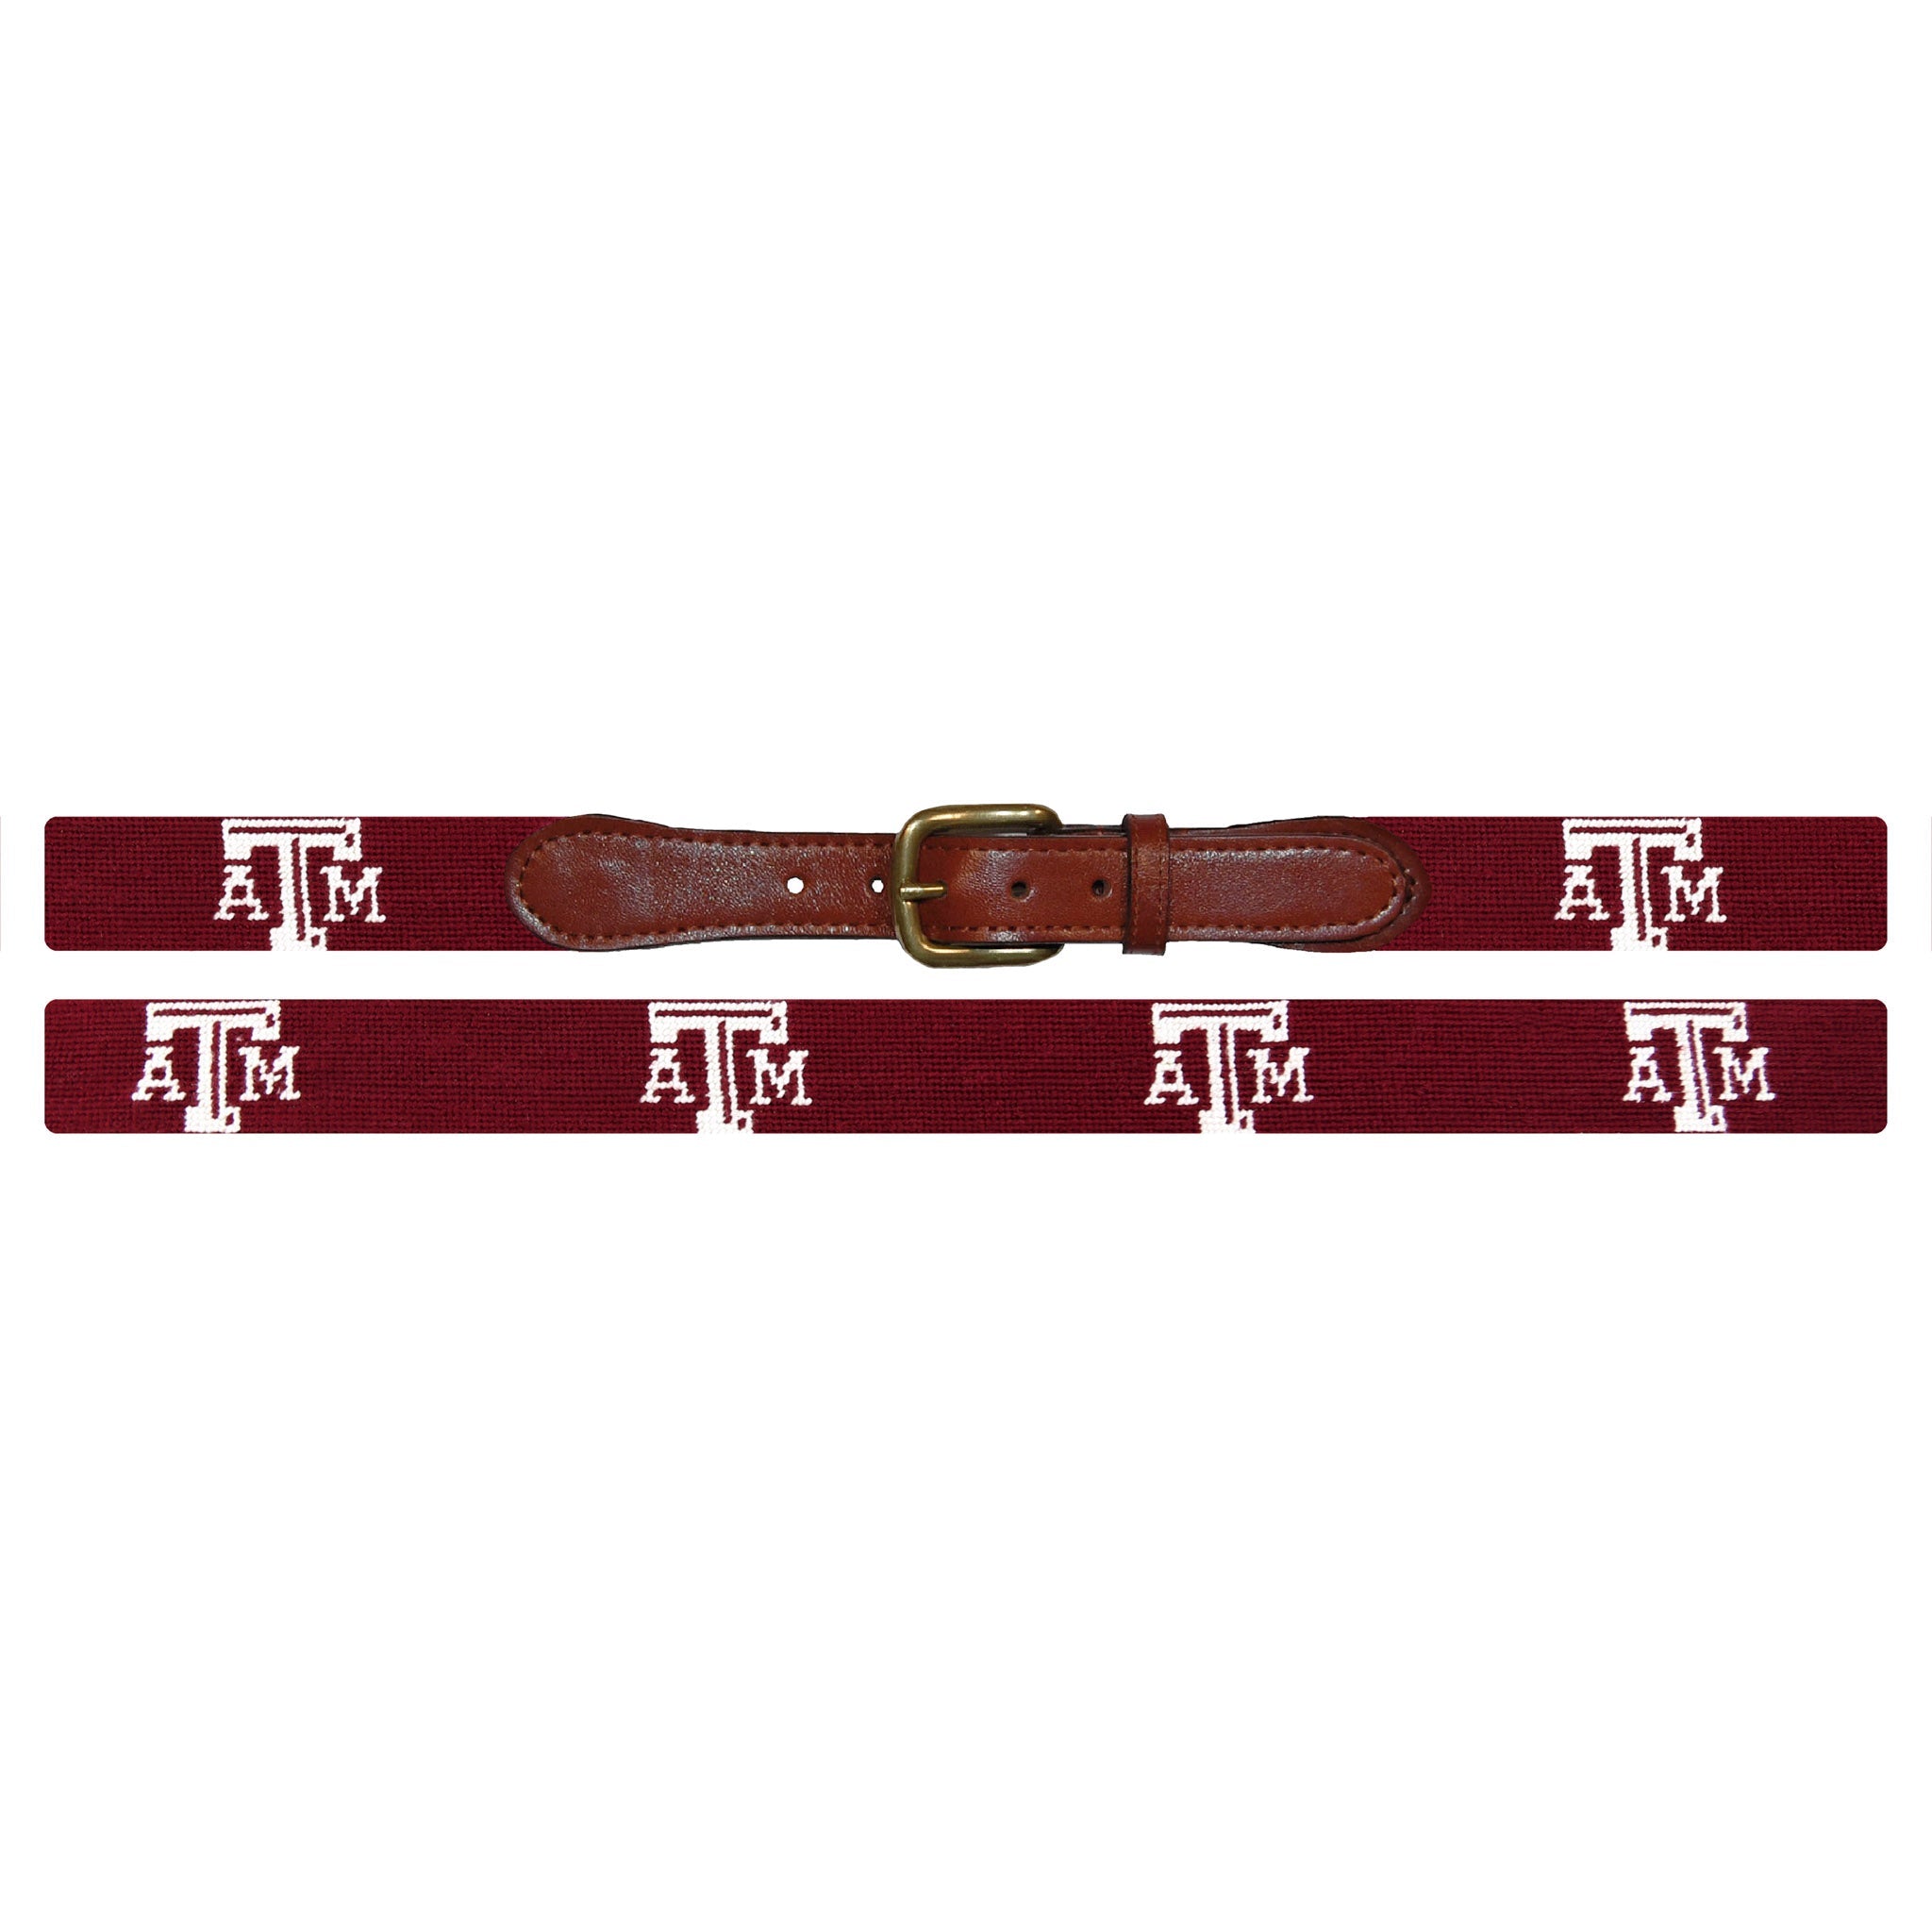 Smathers and Branson Texas A&M Needlepoint Belt Laid Out 